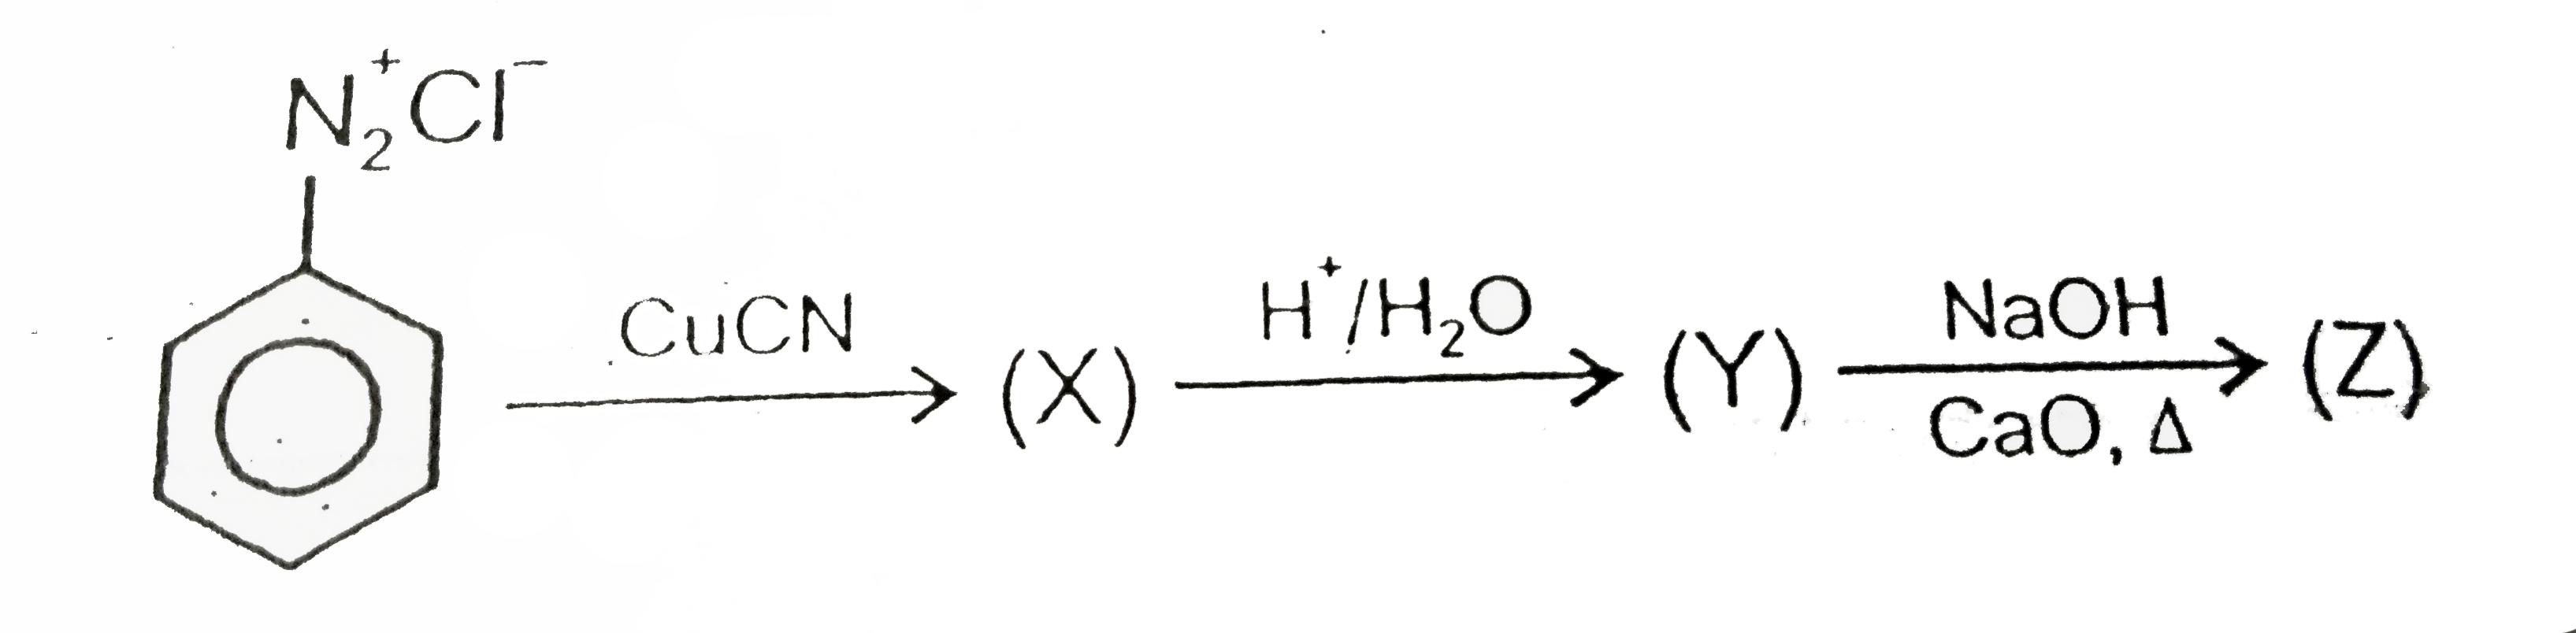 The end product (Z) of the following reaction is